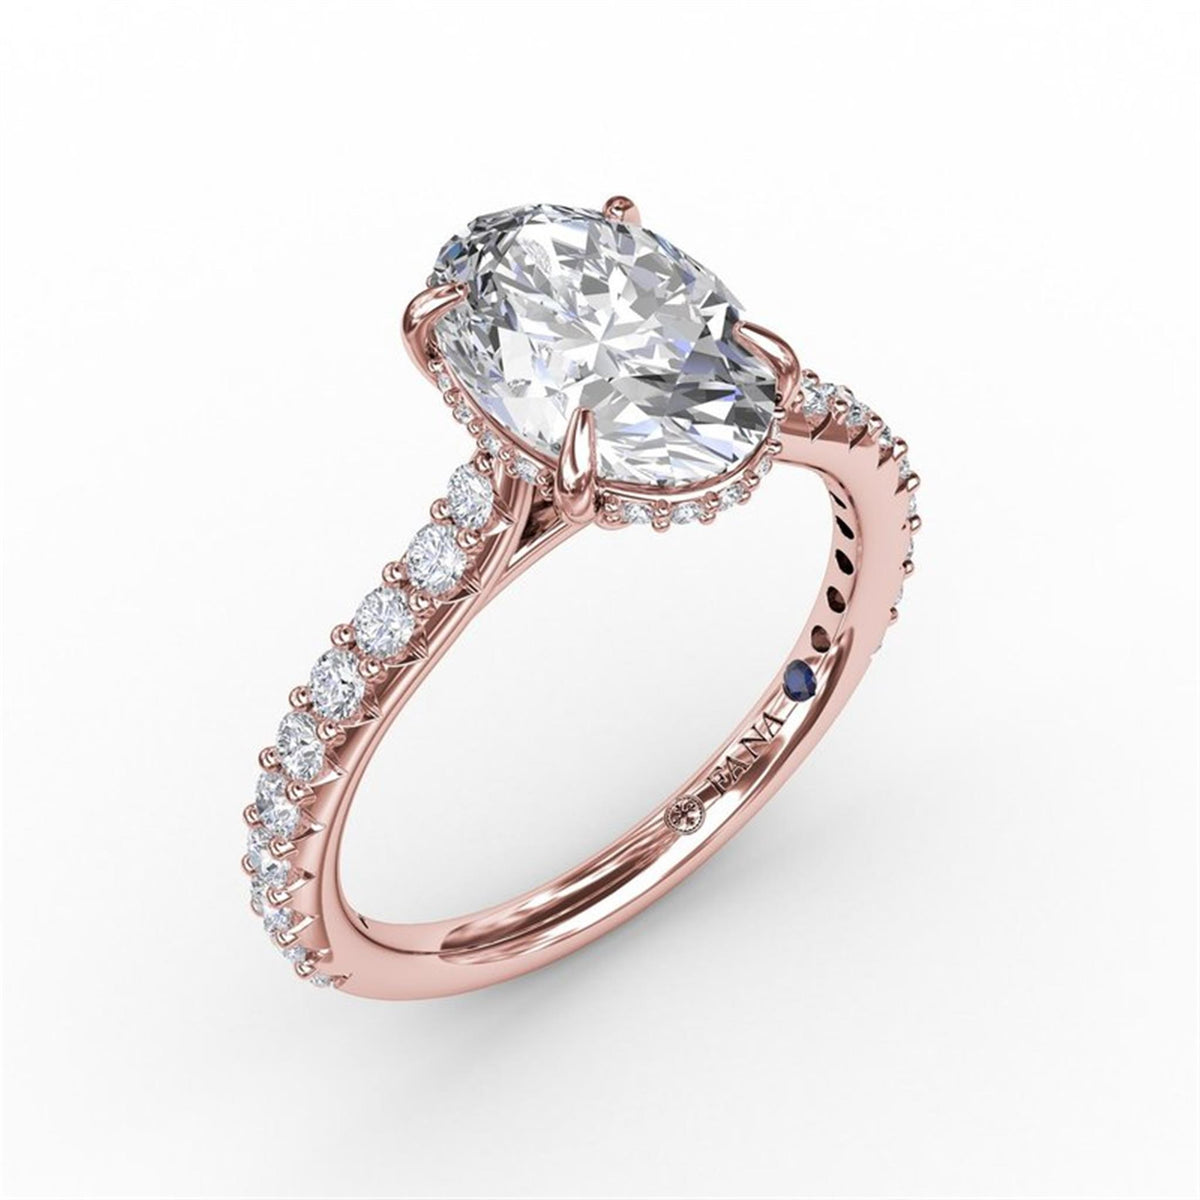 14Kt Rose Gold Classic Prong Engagement Ring Mounting With 0.48cttw Natural Diamonds